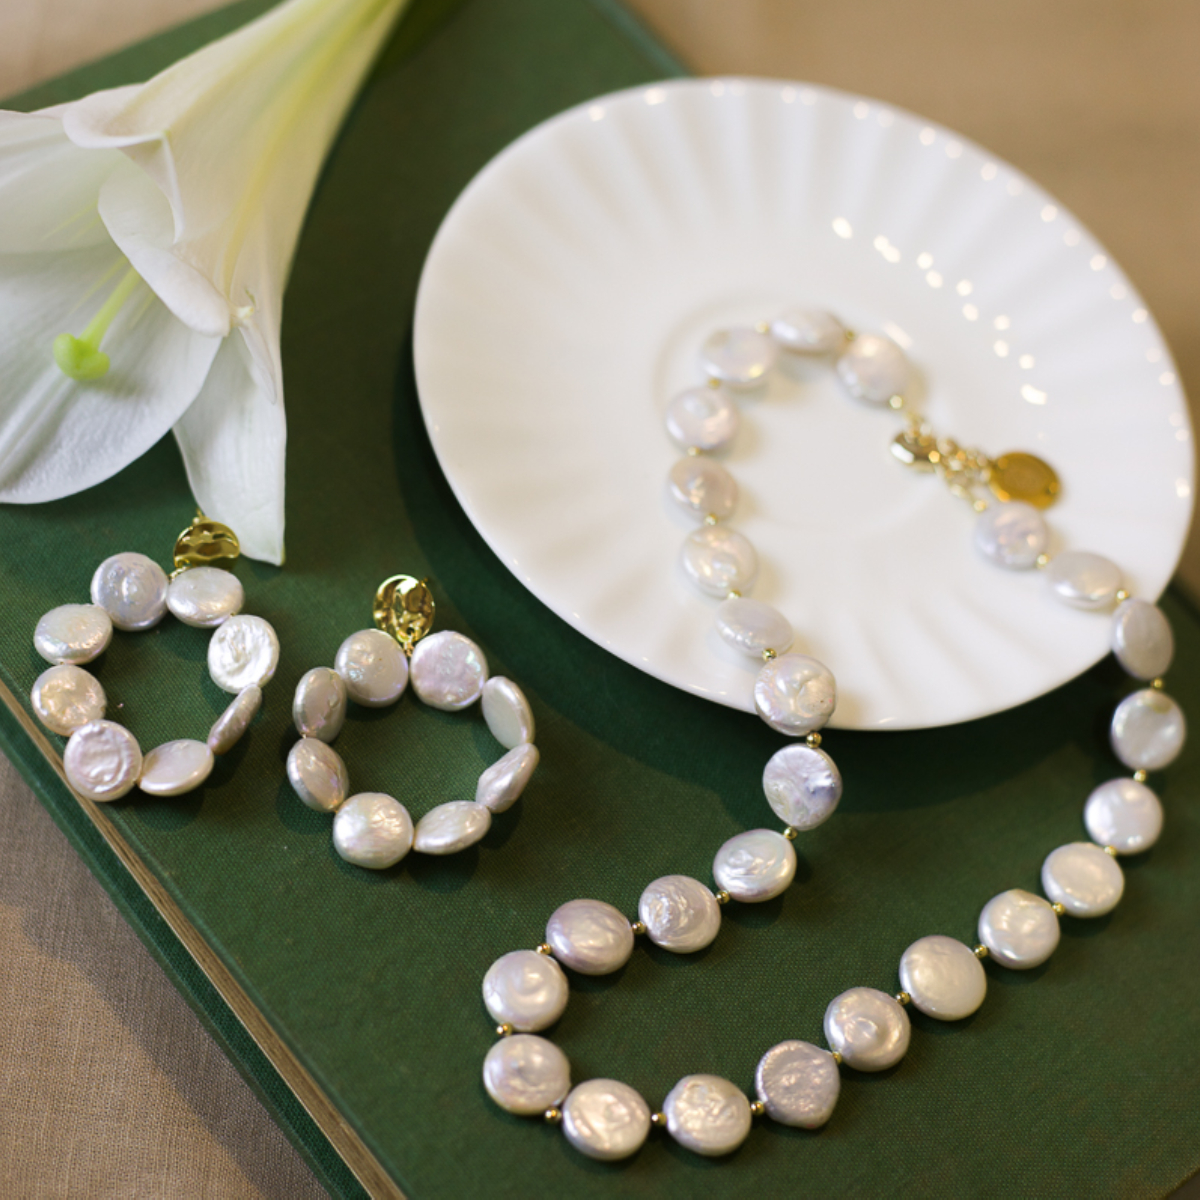 Copy of Frances flat-pearl earrings and necklace_web-4140 (1)